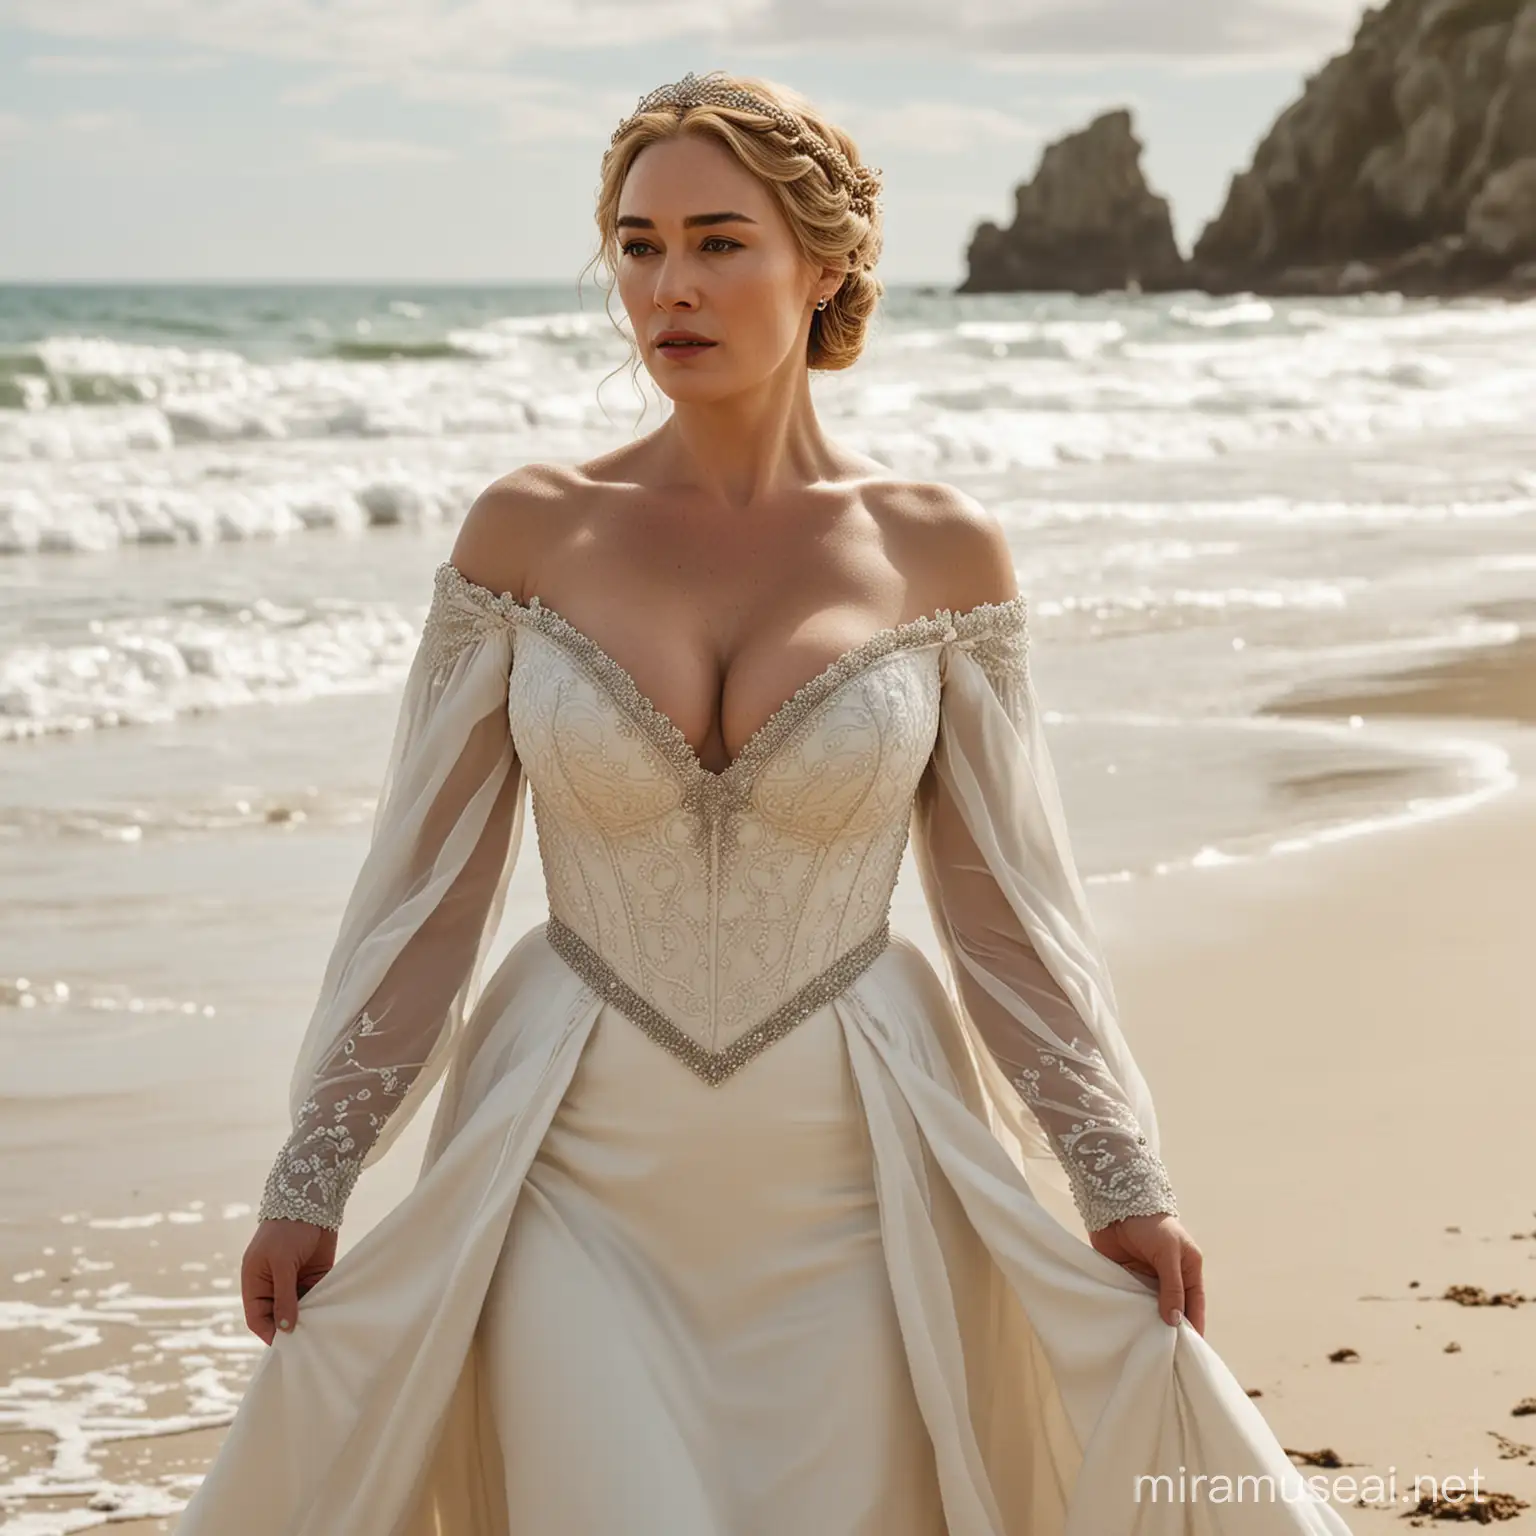 Cersei Lannister White Wedding Dress Beach Portrait with Bold Curves